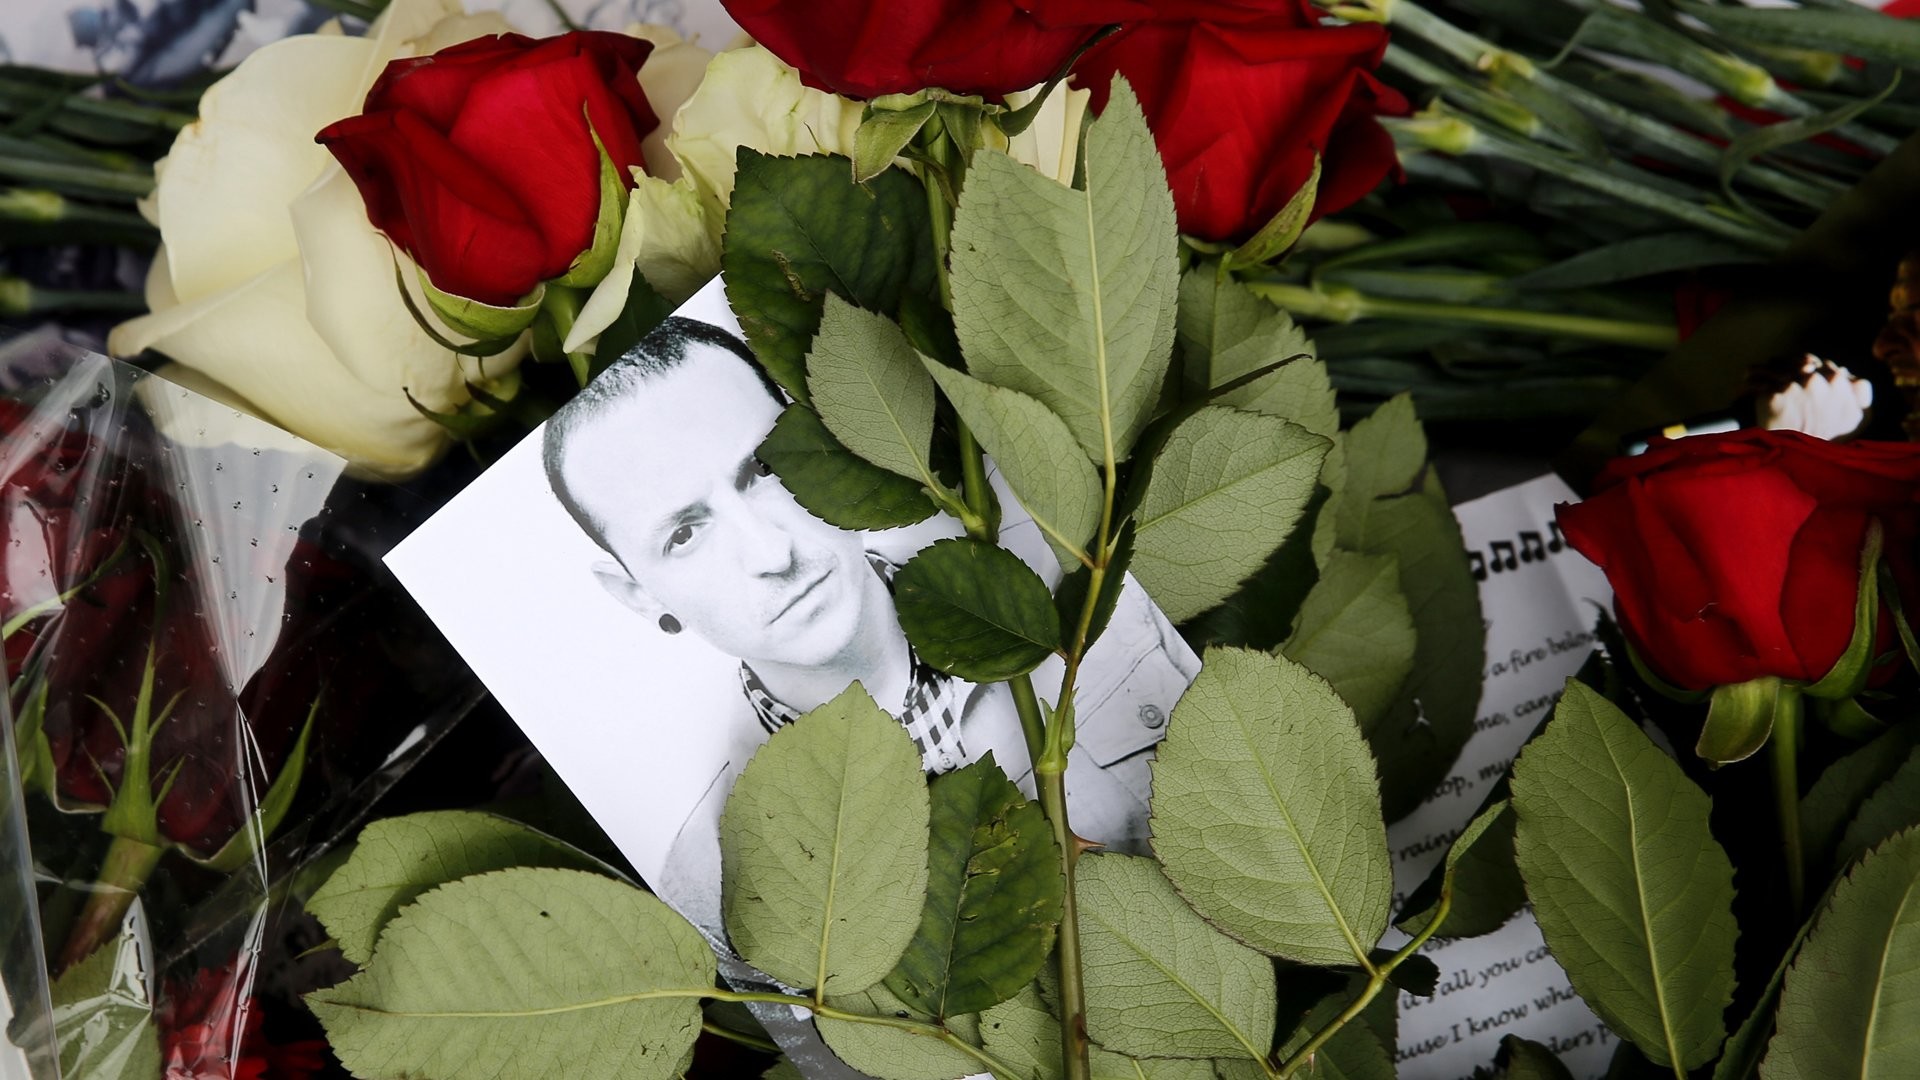 1920x1080 Red roses and a picture of Linkin Park frontman Chester Bennington were  laid in front of the US embassy in central Moscow, Russia, on July 22, 2017.